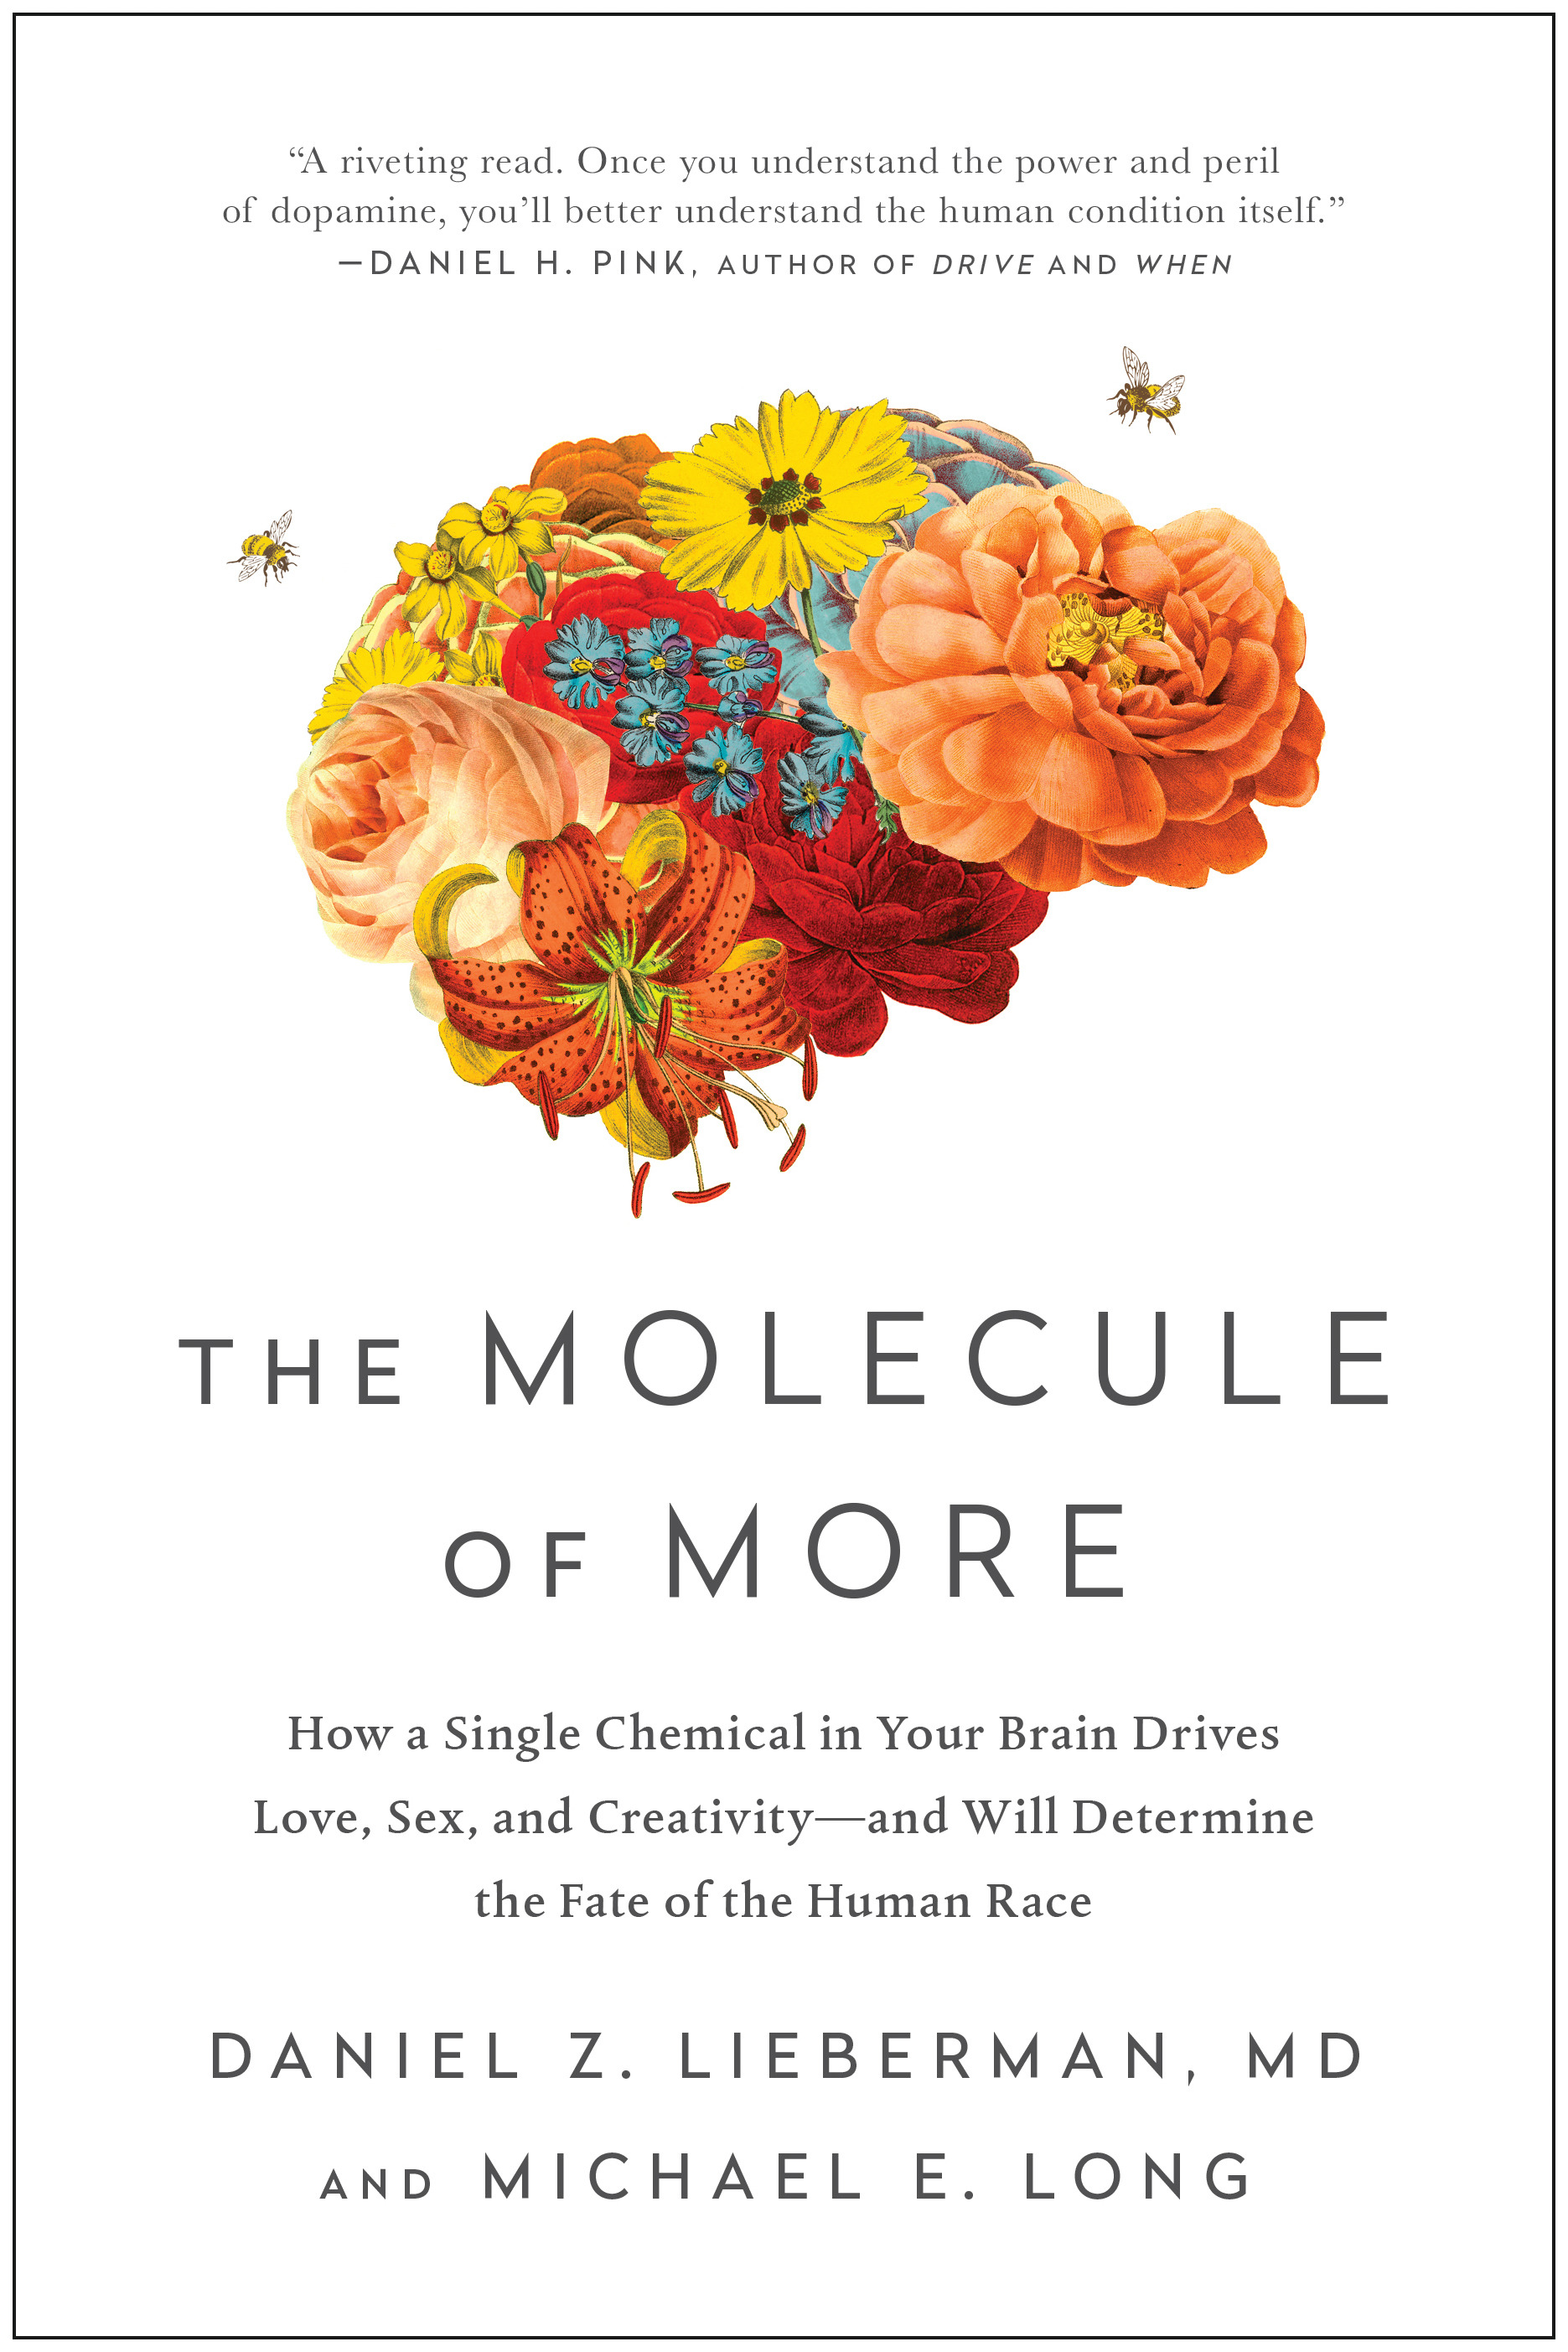 The Molecule of More : How a Single Chemical in Your Brain Drives Love, Sex, and Creativityand Will Det ermine the Fate of the Human Race | Lieberman, Daniel Z.